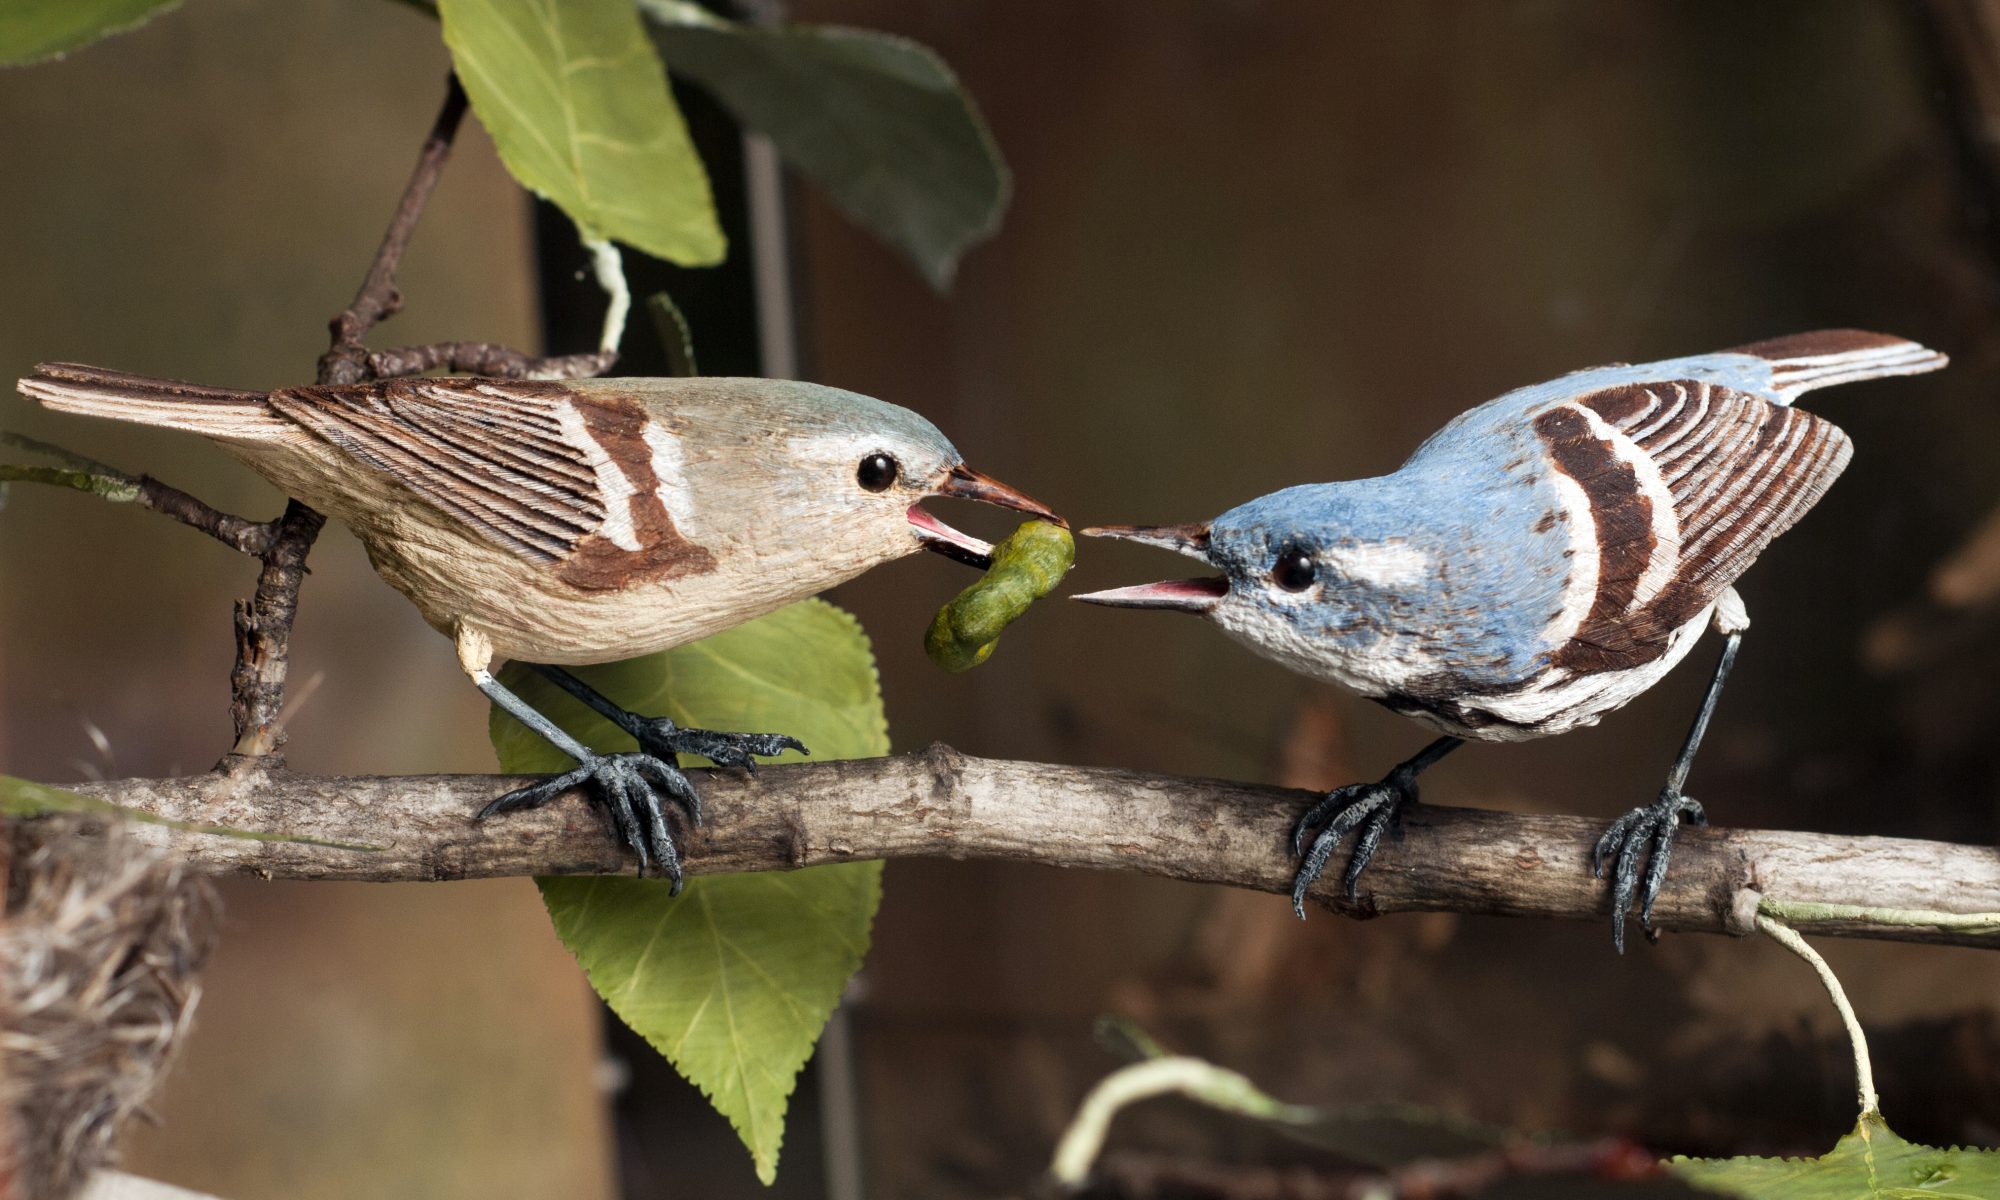 Male cerulean warbler feeding female. Cerulean Warblers carved by Bob Spear at the Birds of Vermont Museum, Huntington, Vermont. Photograph copyright Caleb Kenna and used by permission.